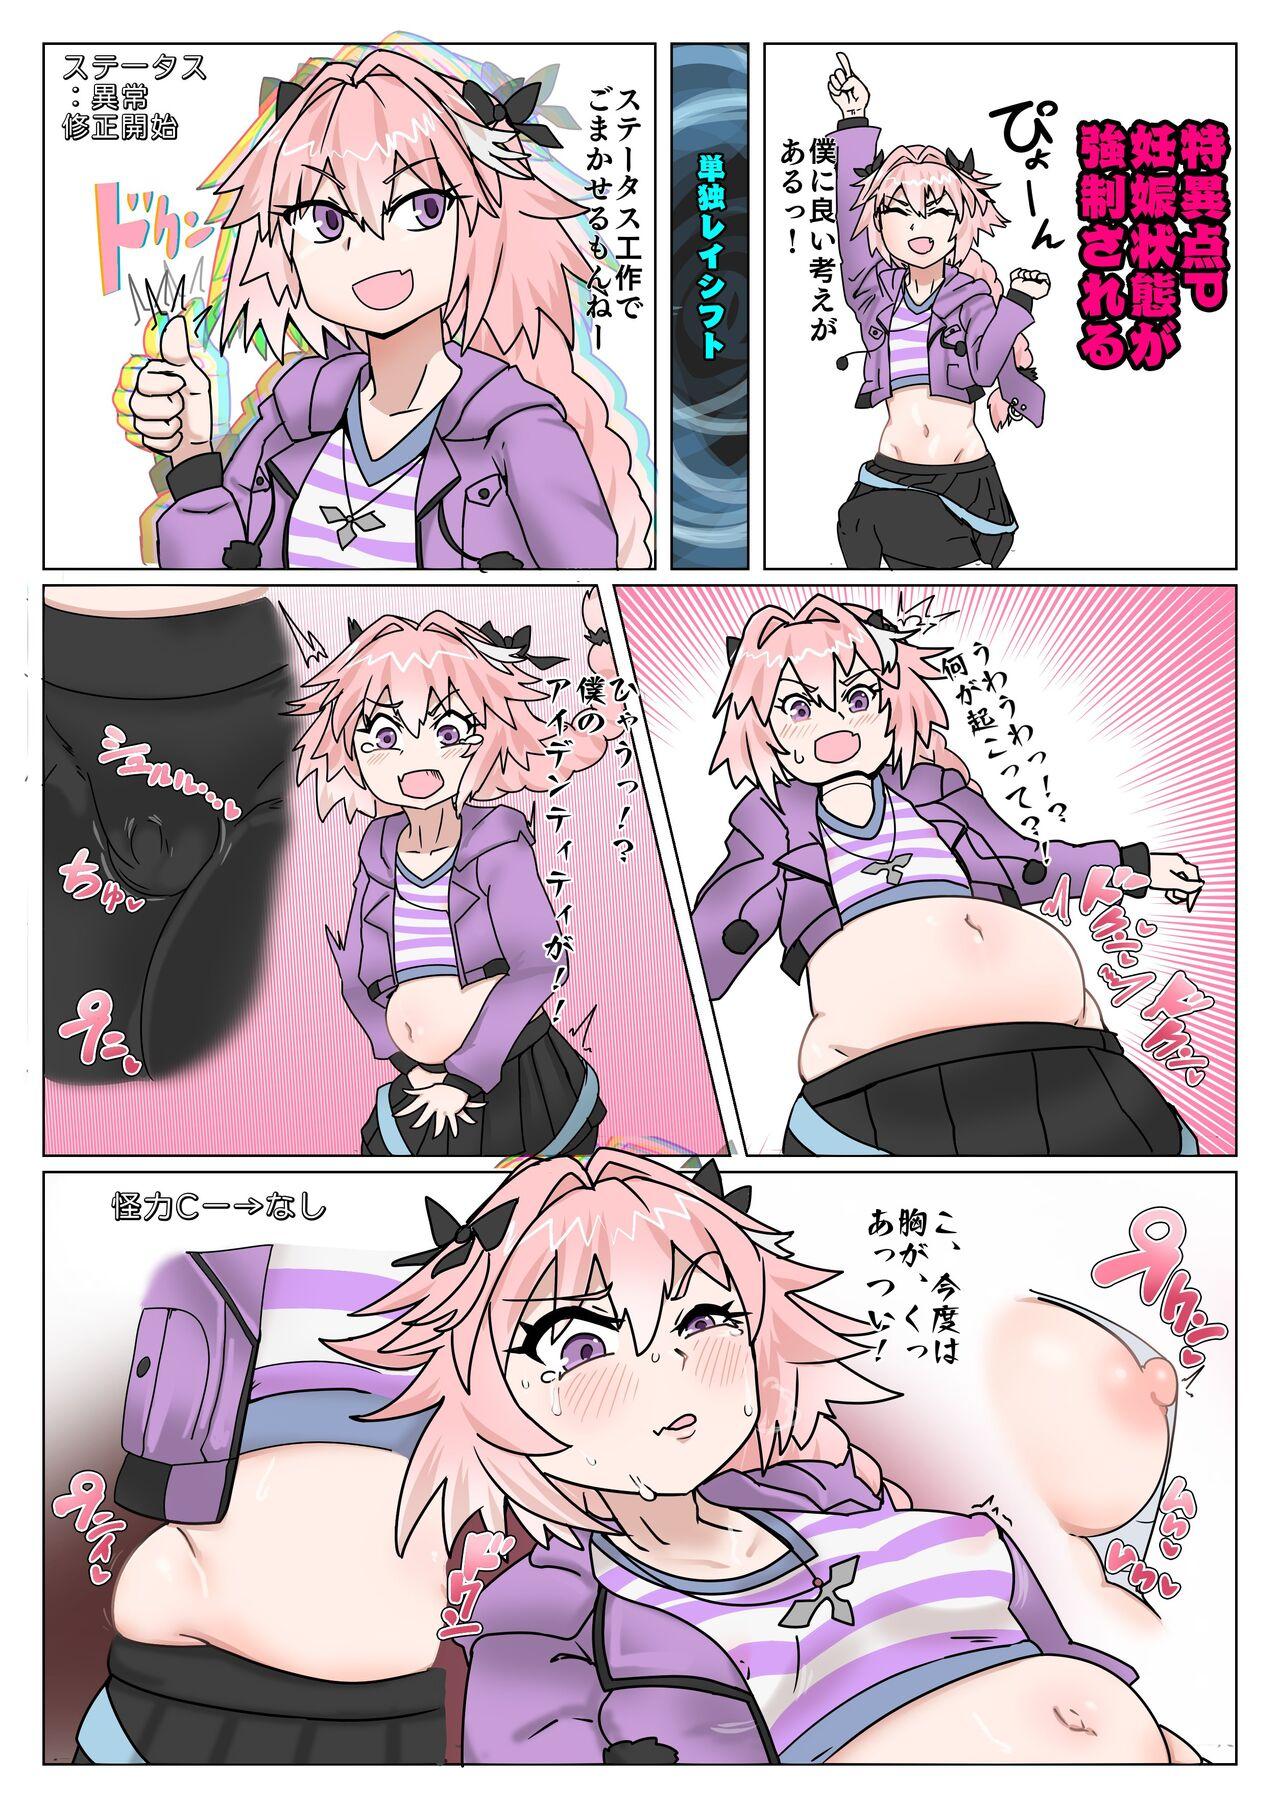 Astolfo gets shifted and now its actually a woman 0